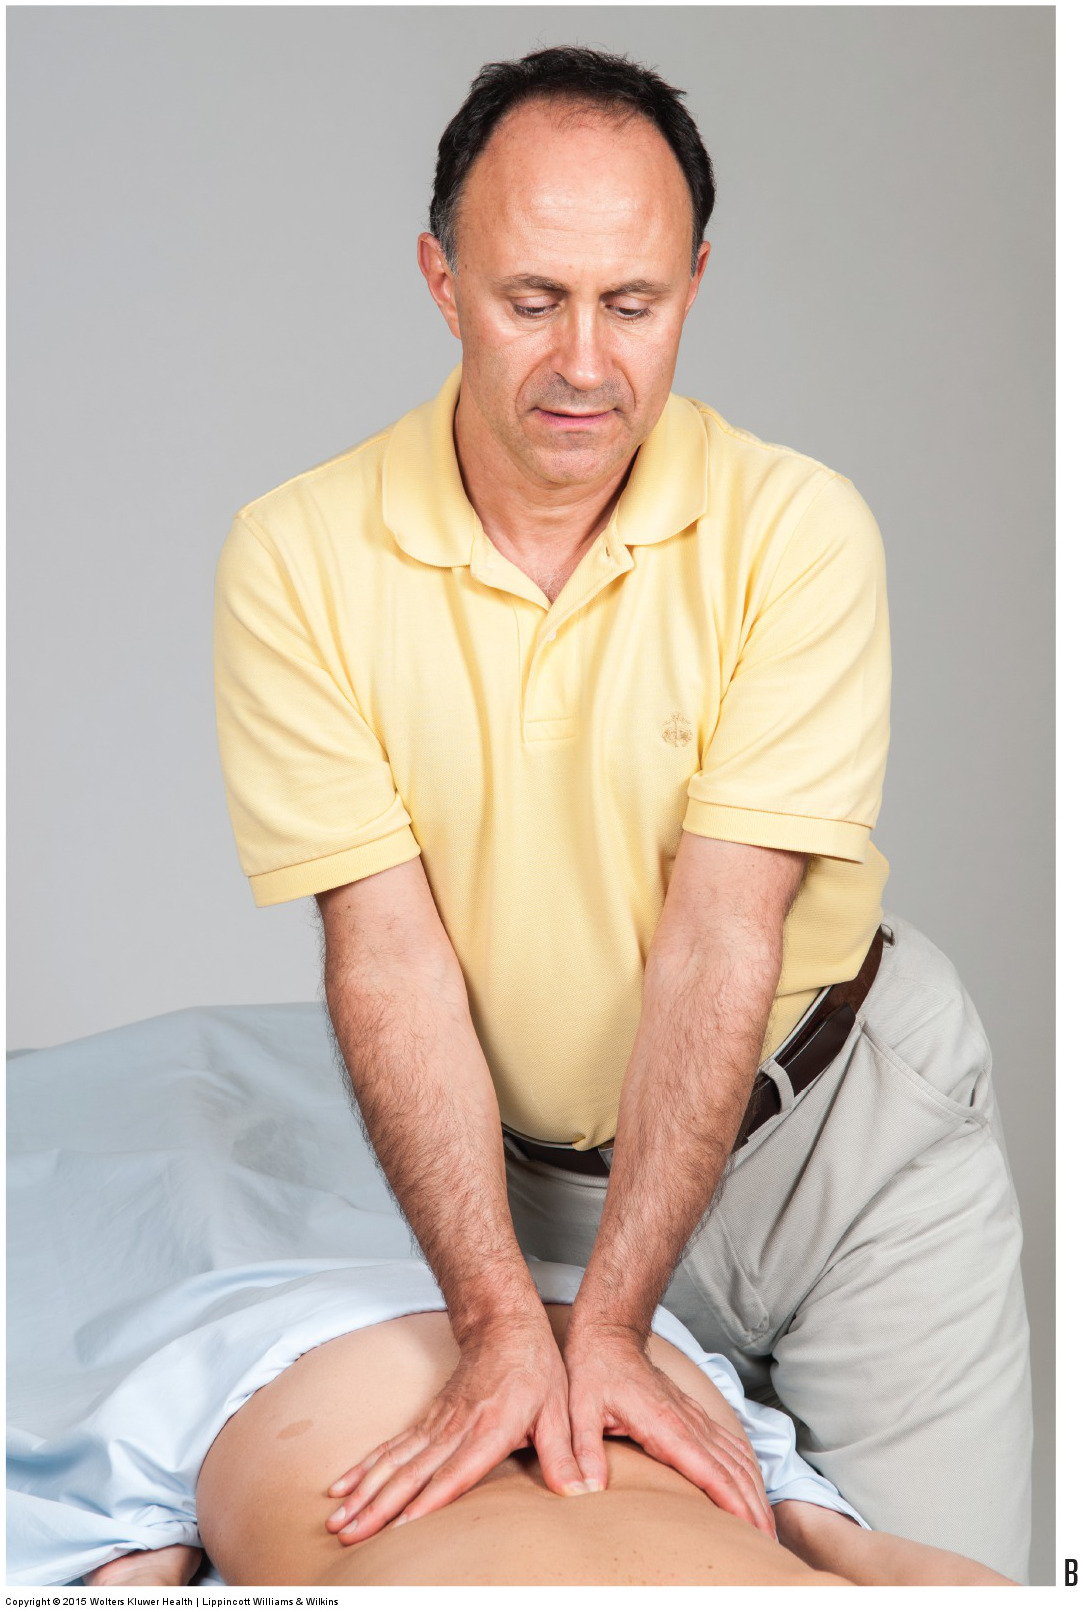 What Is Manual Therapy Clinical Orthopedic Manual Therapy